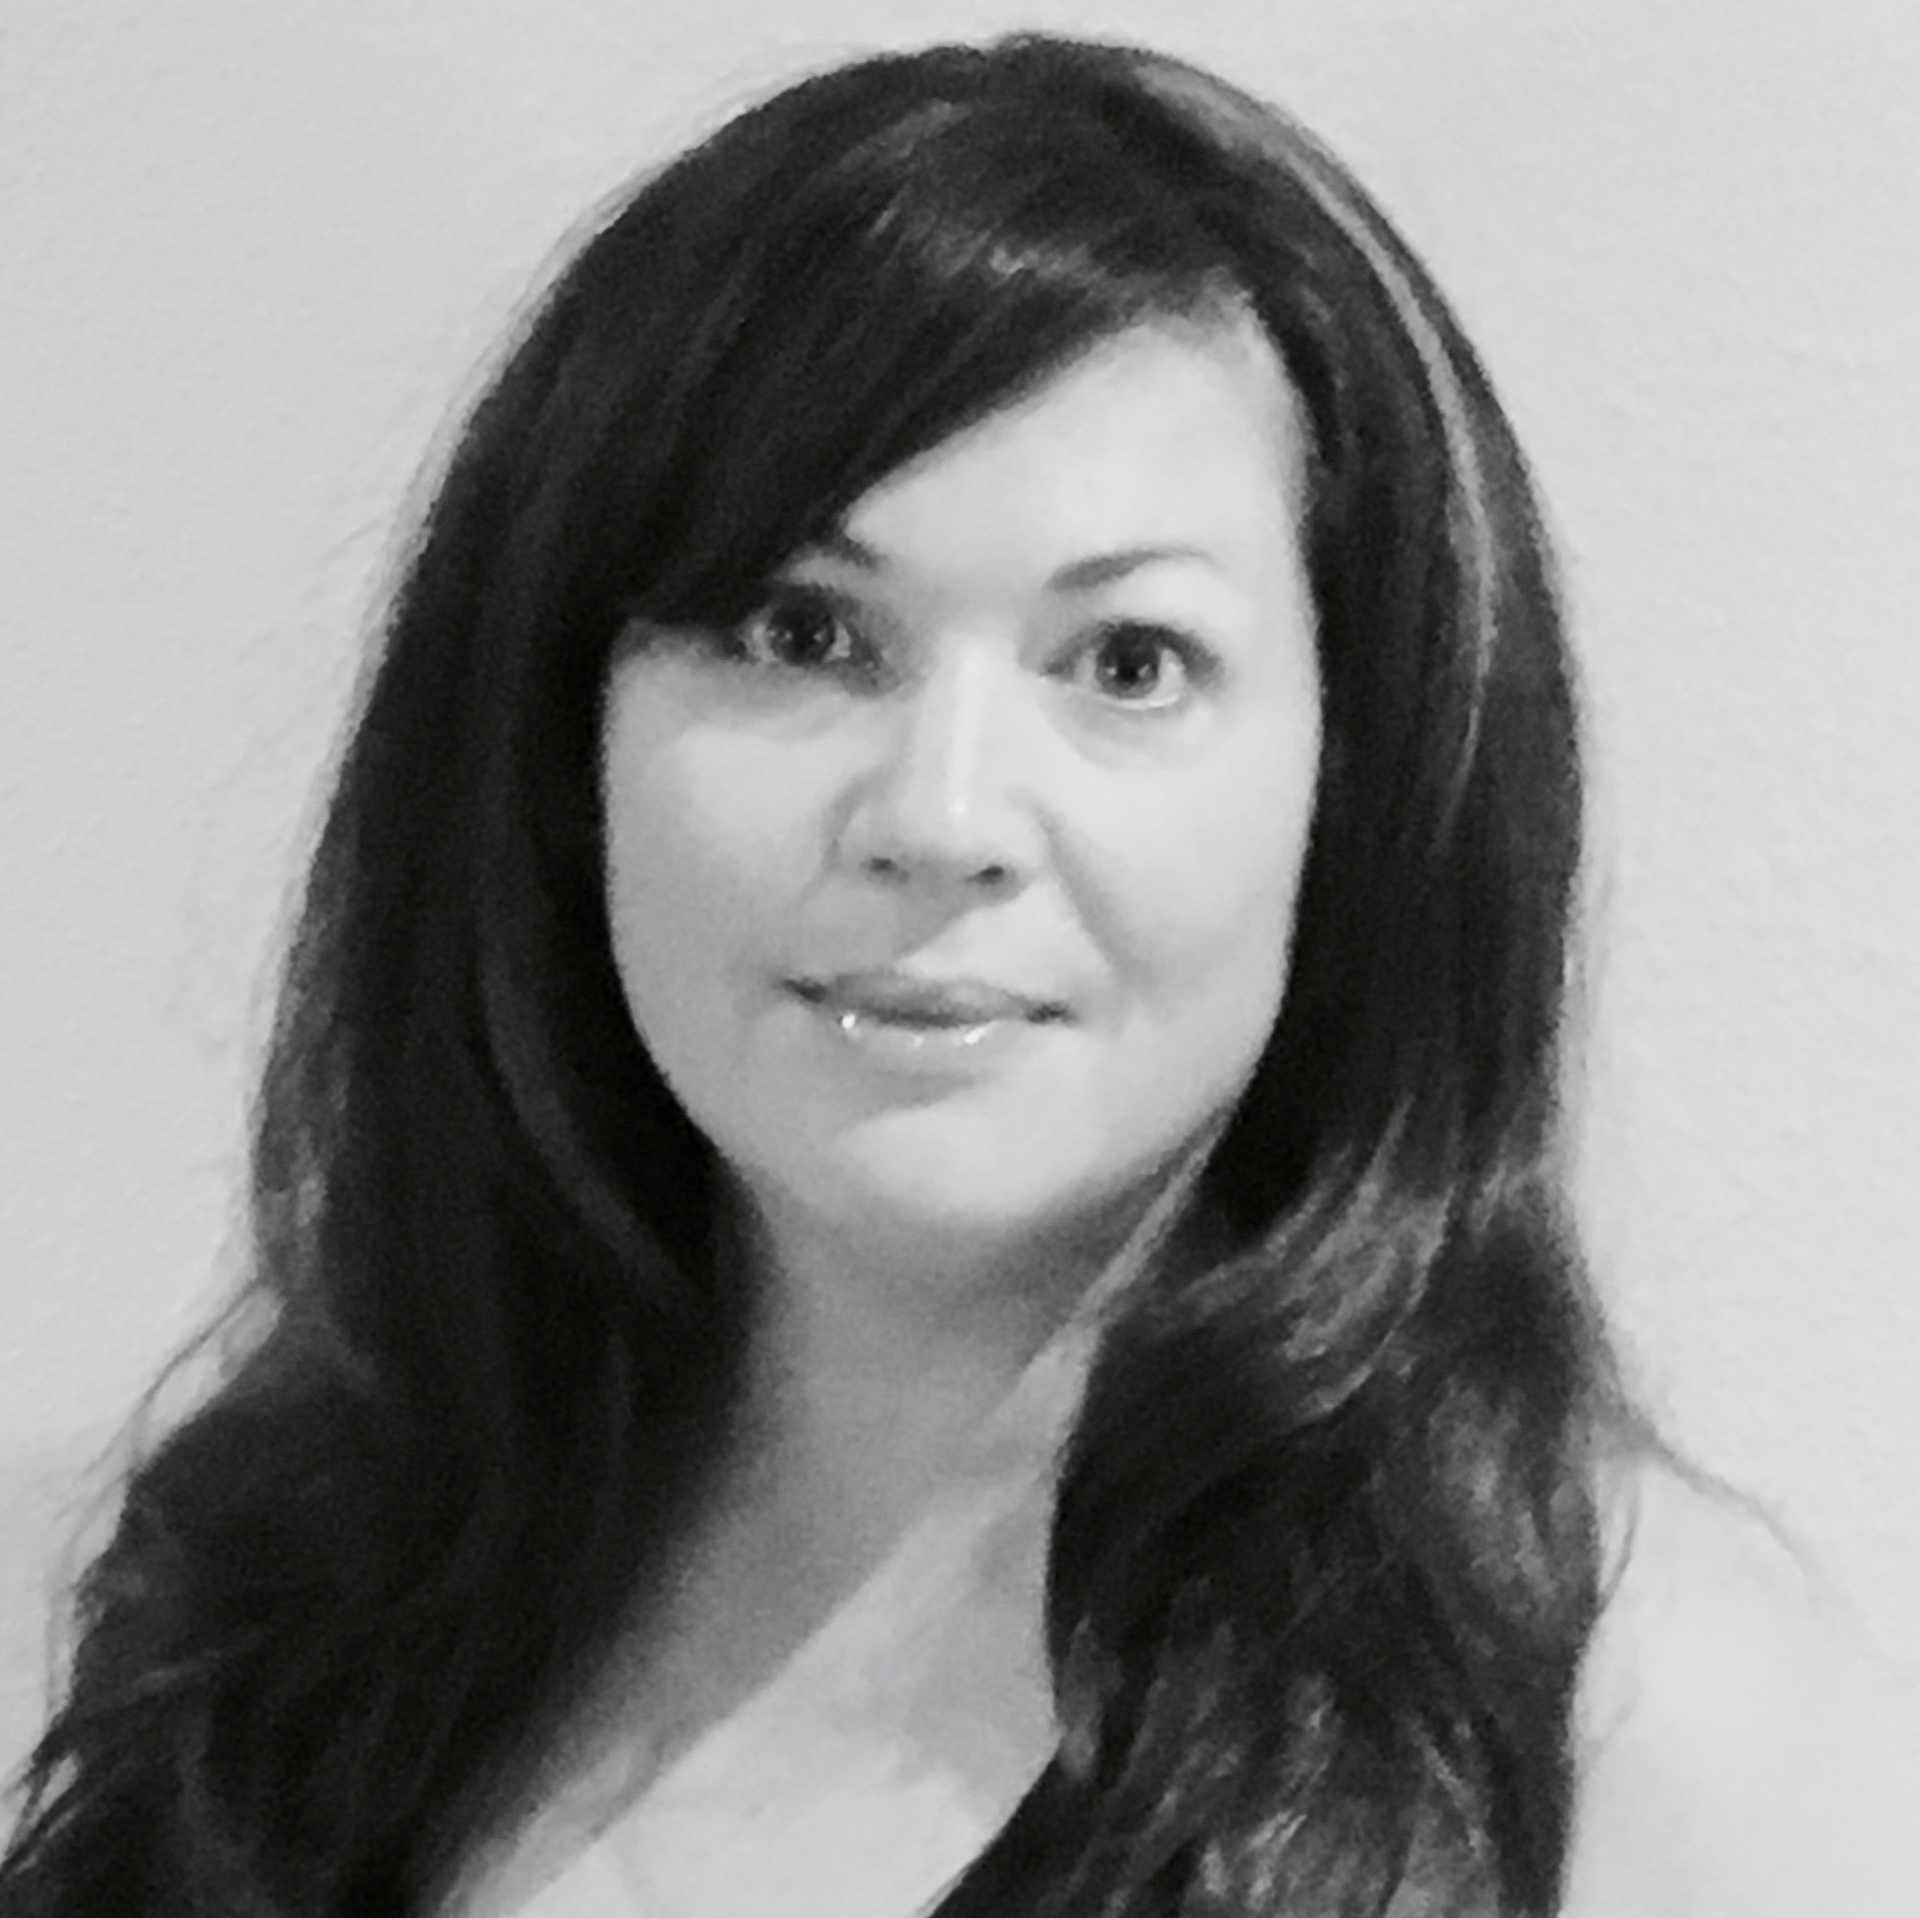 Andrea with long dark hair is smiling in a black and white photo .